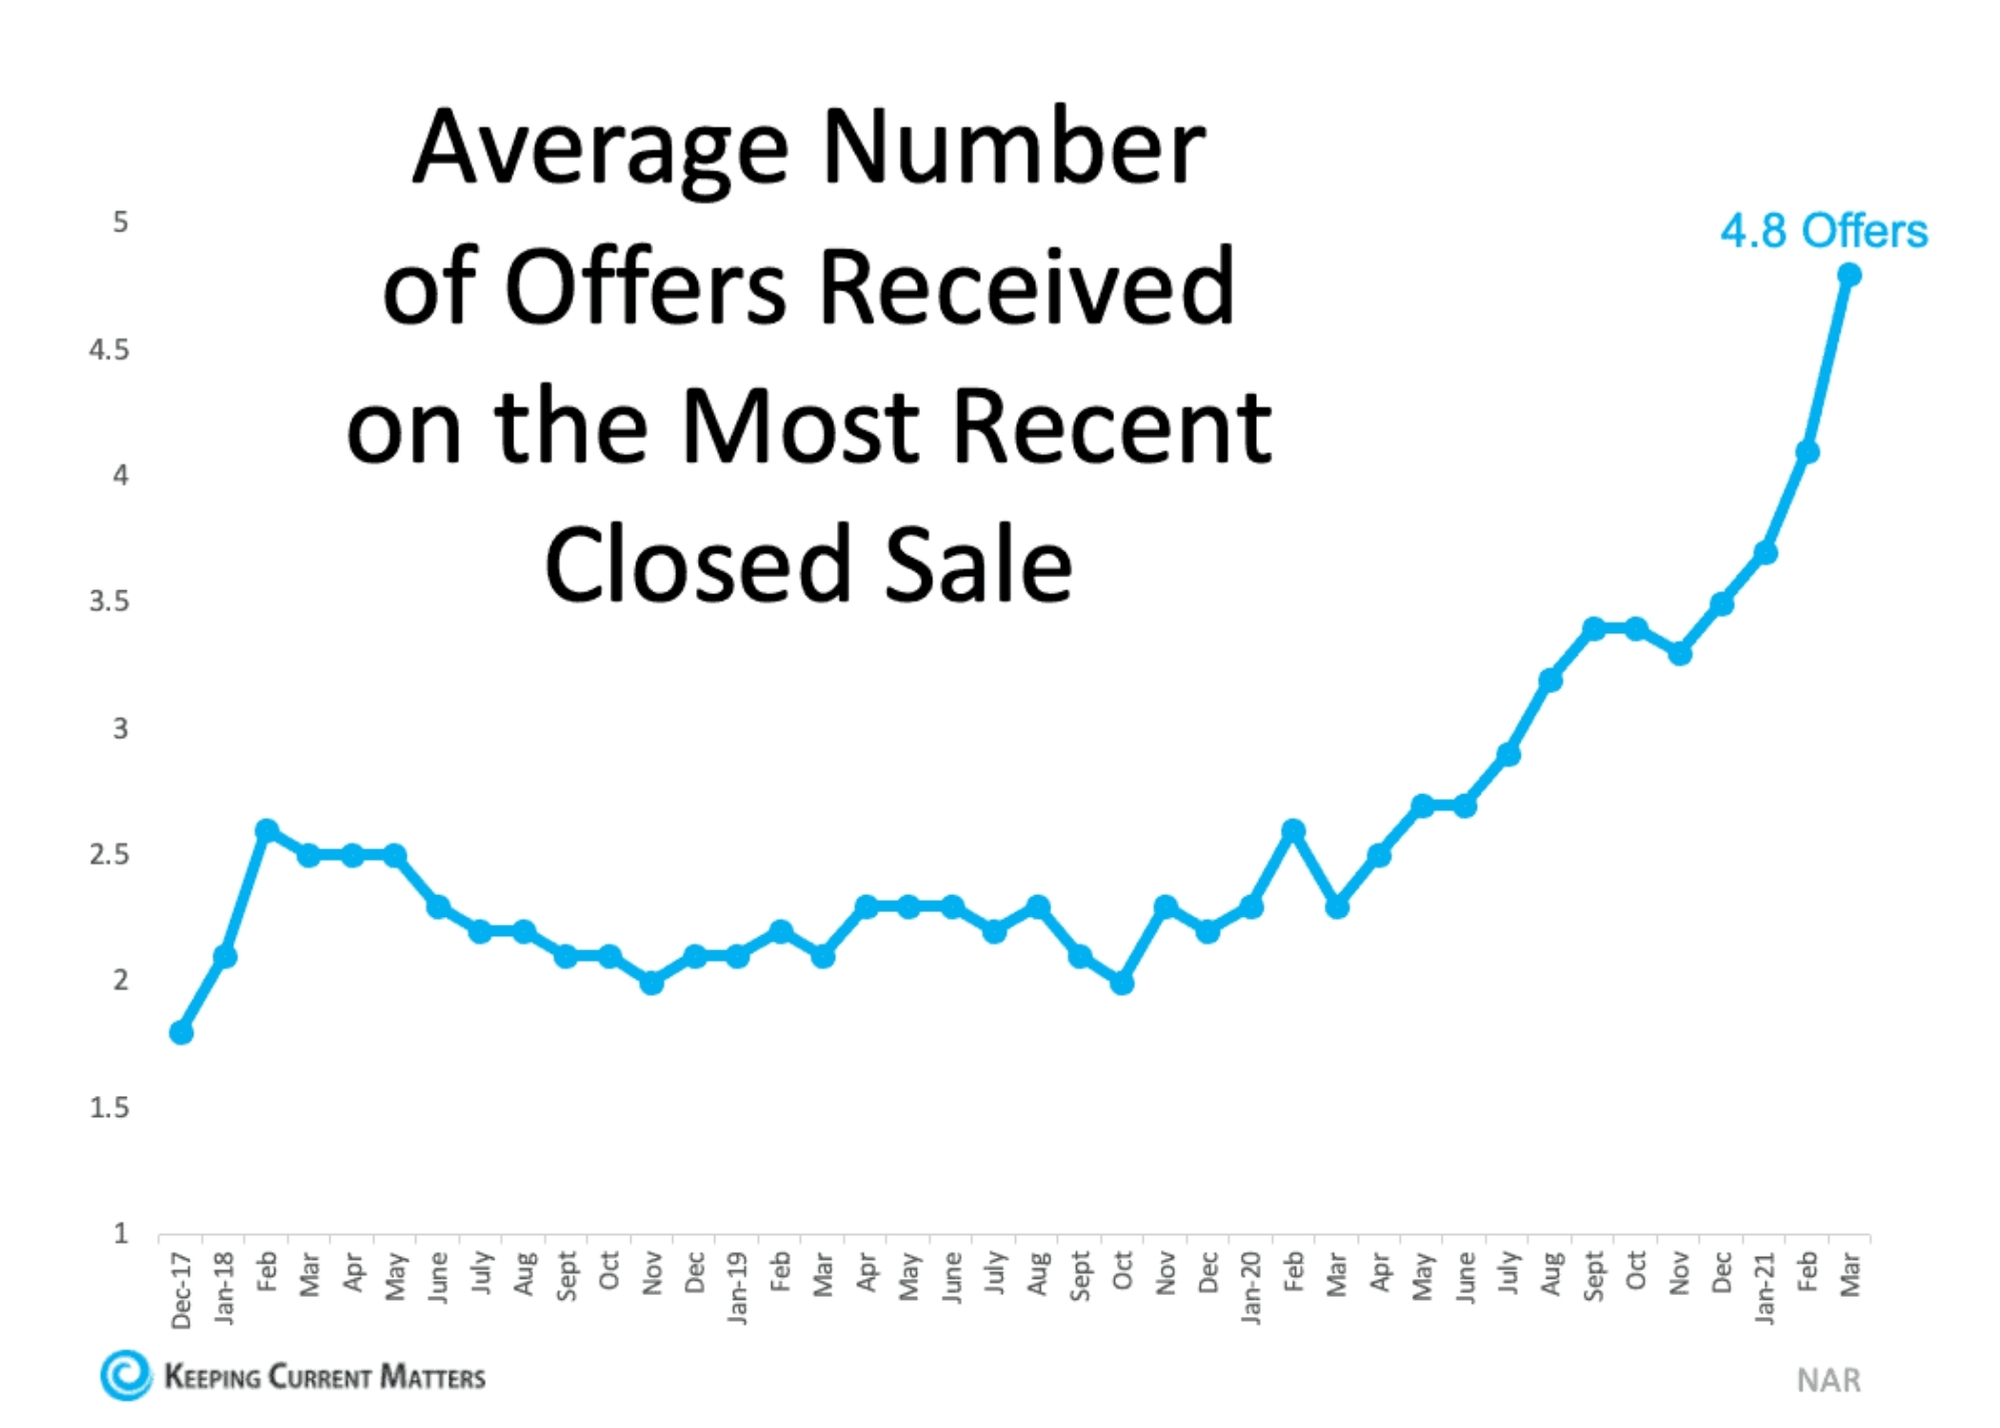 Average Number of Offers Received on the Most Recent Closed Sale